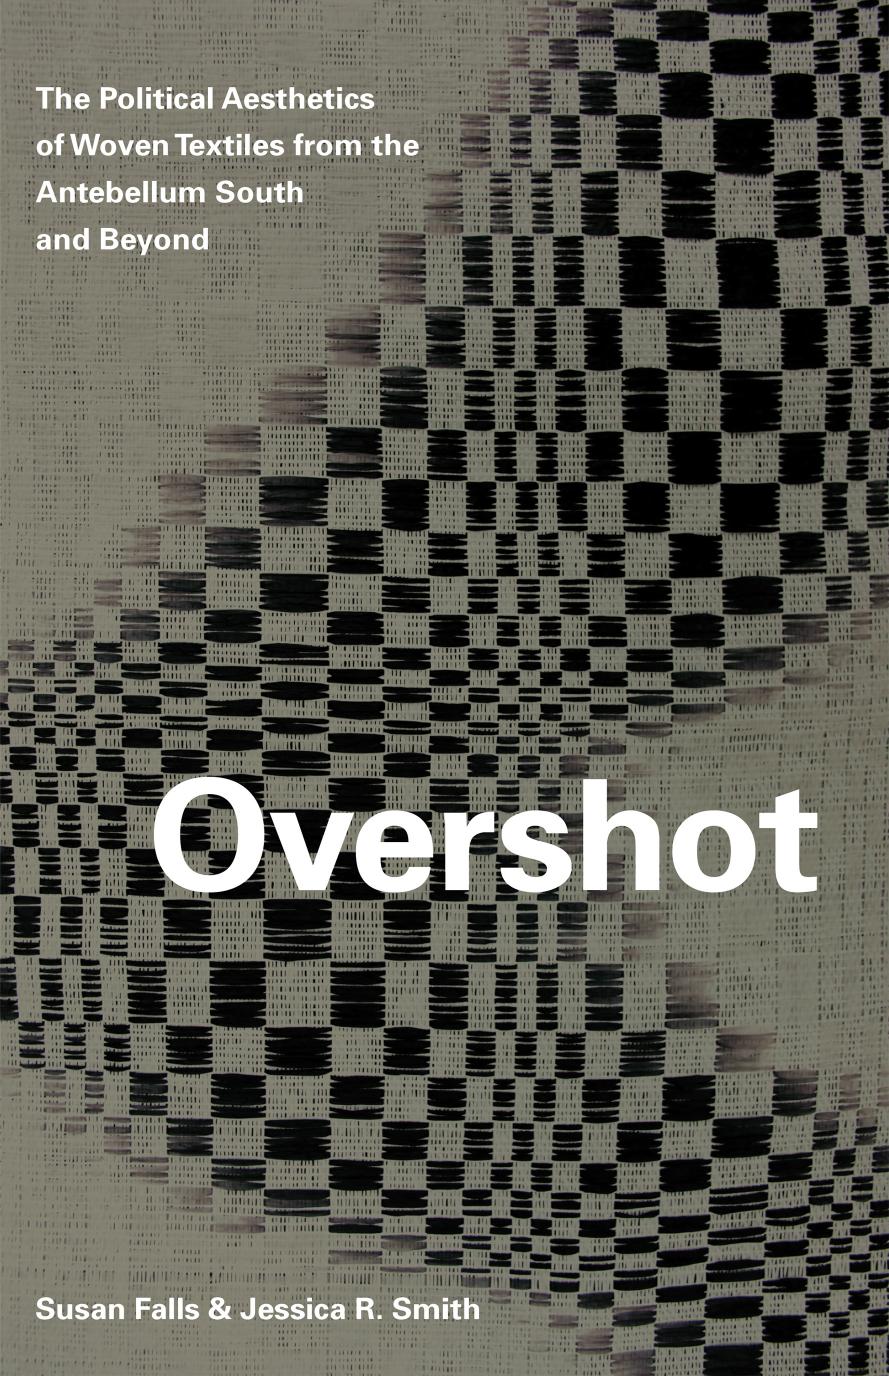 Overshot: The Political Aesthetics of Woven Textiles from the Antebellum South and Beyond by Susan Falls & Jessica R. Smith